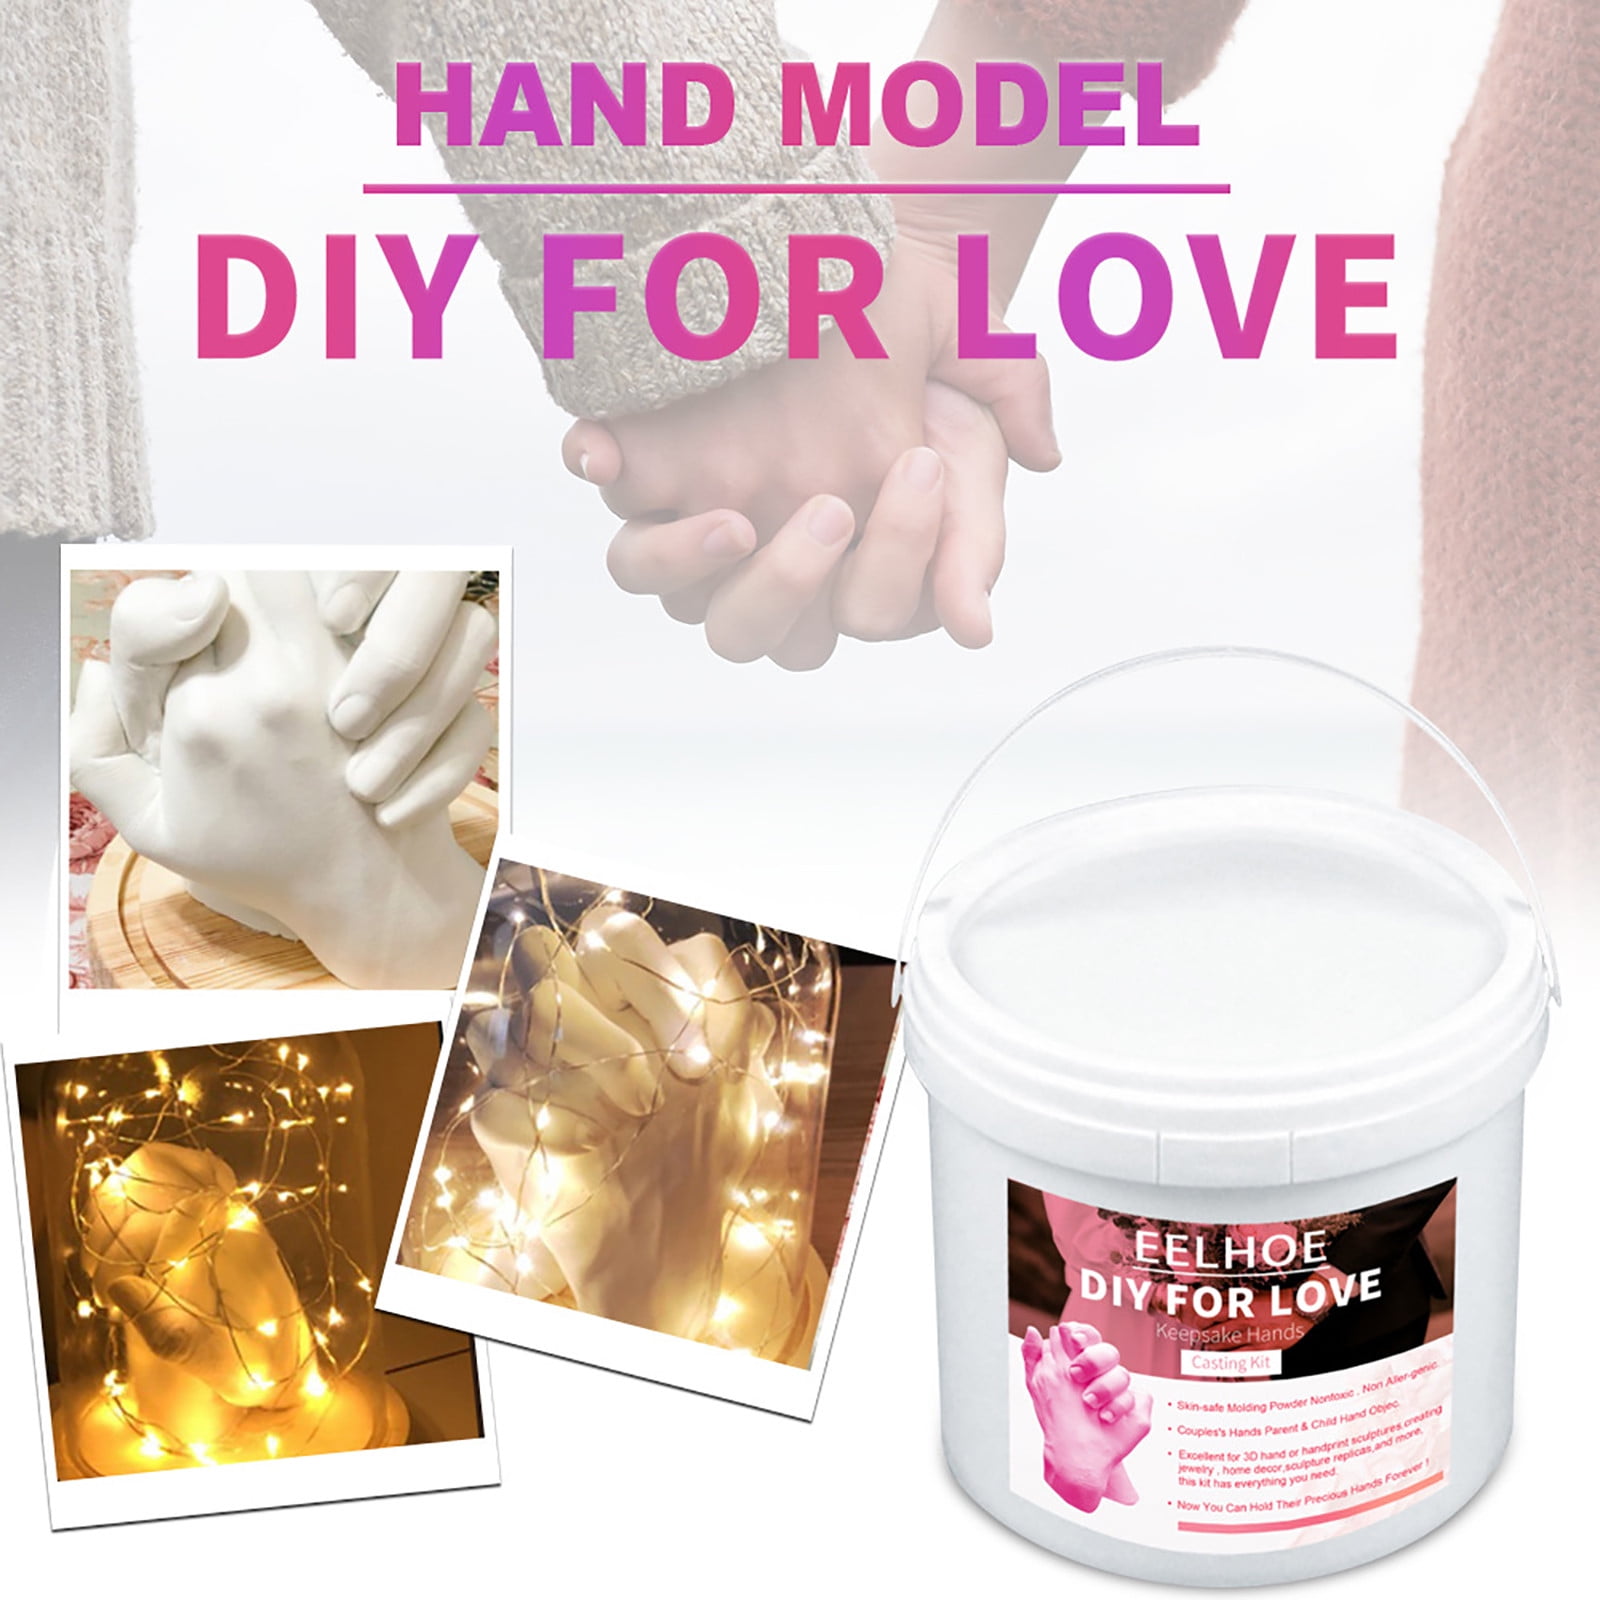  Hands Casting Kit, DIY Plaster Statue Molding Kit & Hand  Casting Kits for 2 Adult, Wedding, Friends, Anniversary, Hand Hold Casting  Kit for Holiday Activities and Perfect for Couple Gift